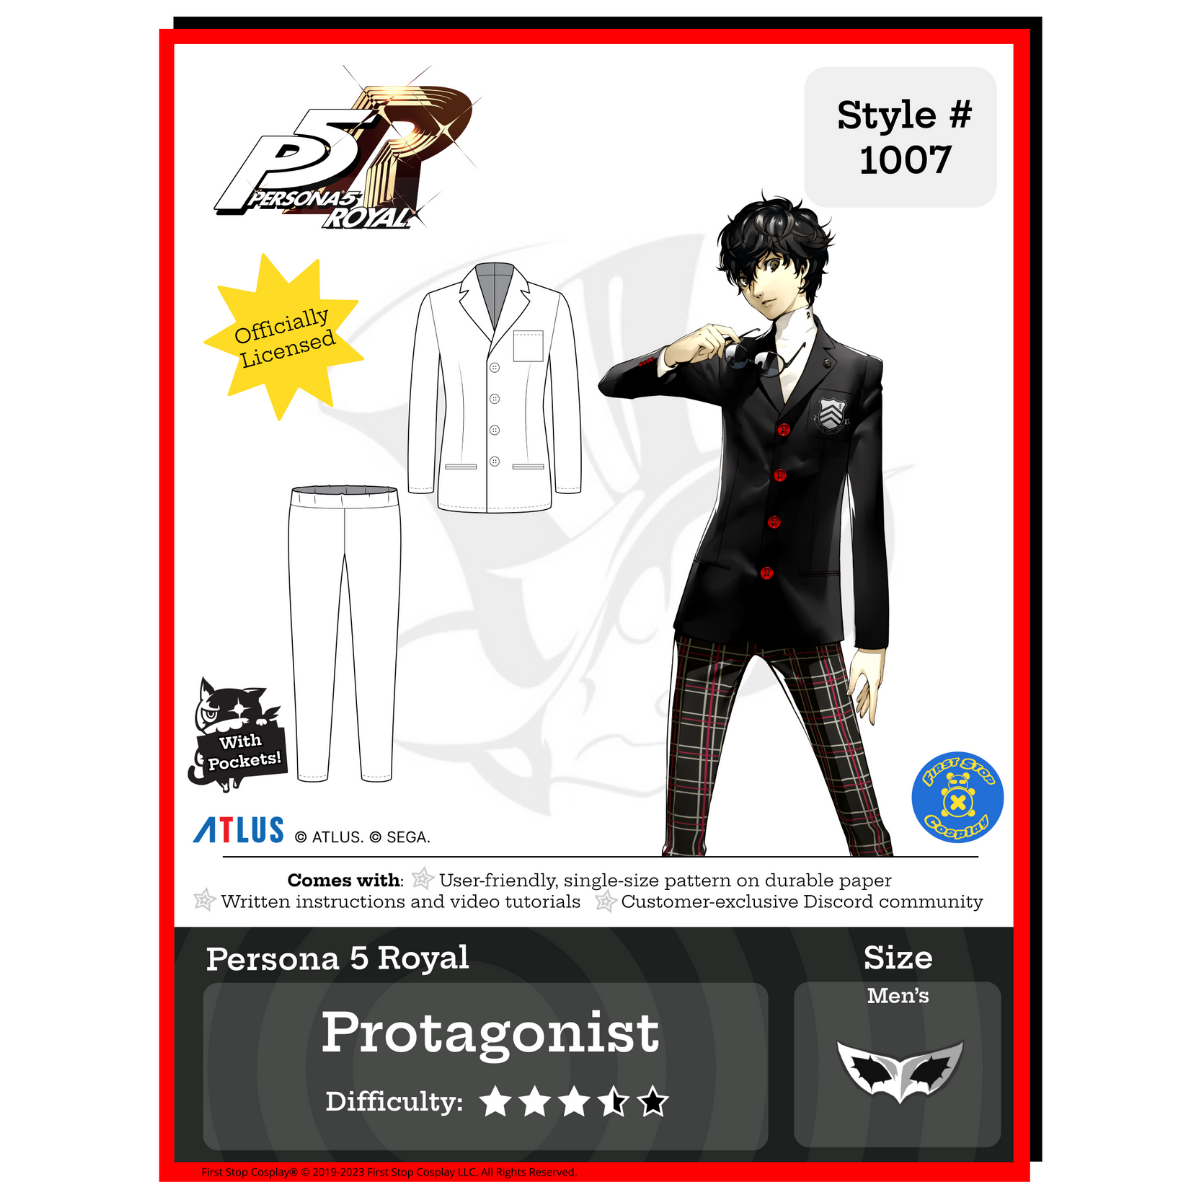 A graphic of the front packaging for Style #1007- Protagonist. The Persona 5 Royal logo is in the top left corner. Below the logo is an "officially licensed" stamp. Below the stamp is the line art of the completed pattern. To the right is an image of Persona 5 Royal's character, Protagonist, wearing his Shujin school uniform outfit. To the right of Protagonist, in the corner, is the First Stop Cosplay circle logo. This pattern is 3 1/2 star in difficulty rating and follows our men's size chart.